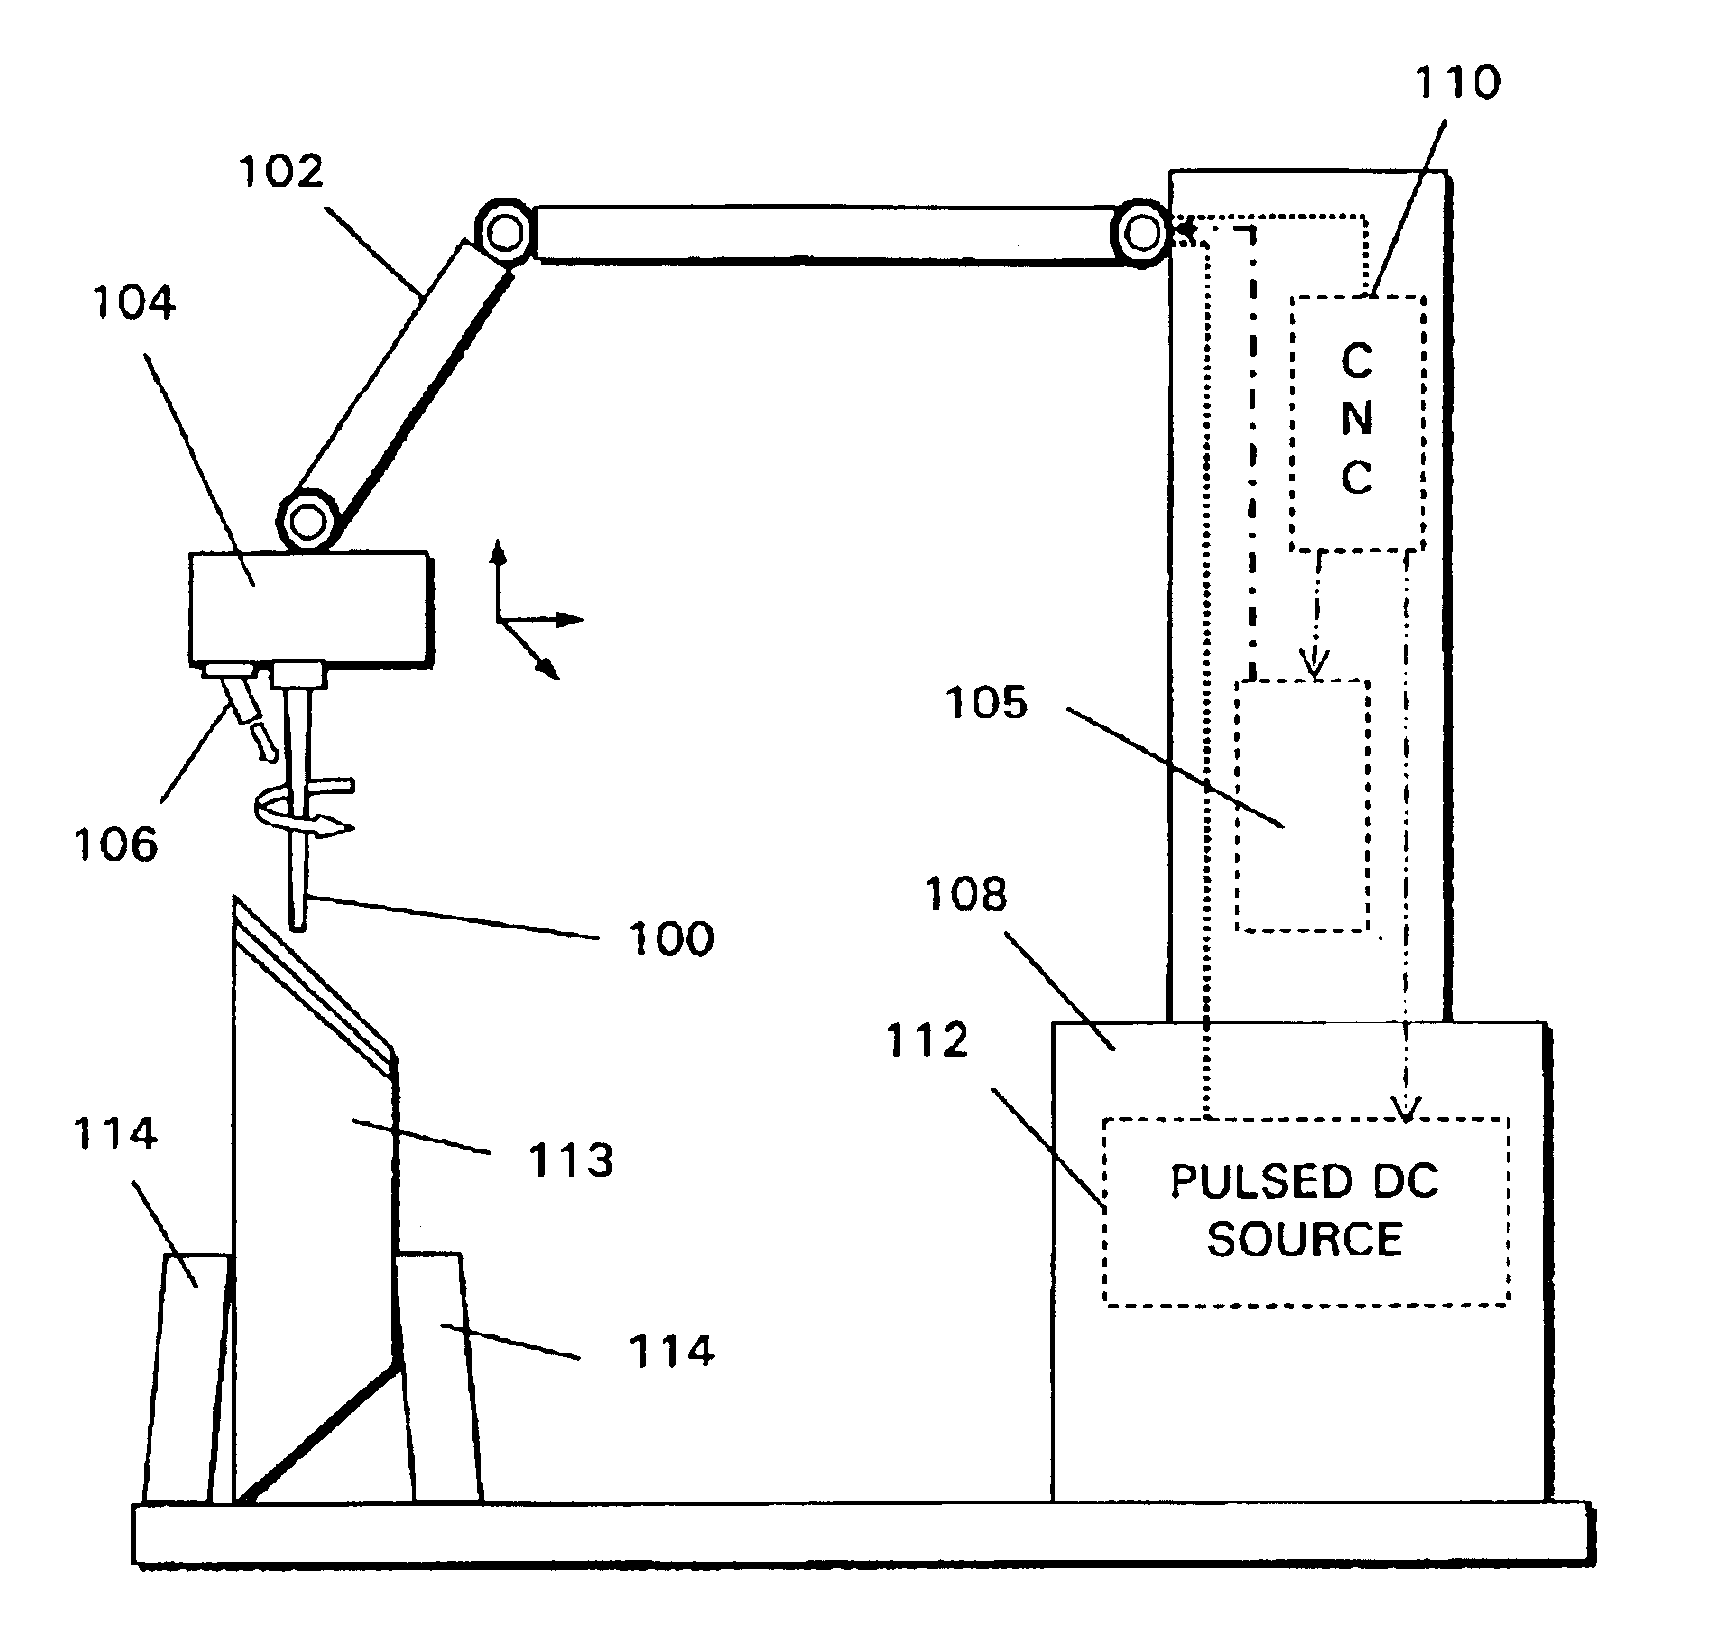 Multi-axis numerical control electromachining of bladed disks